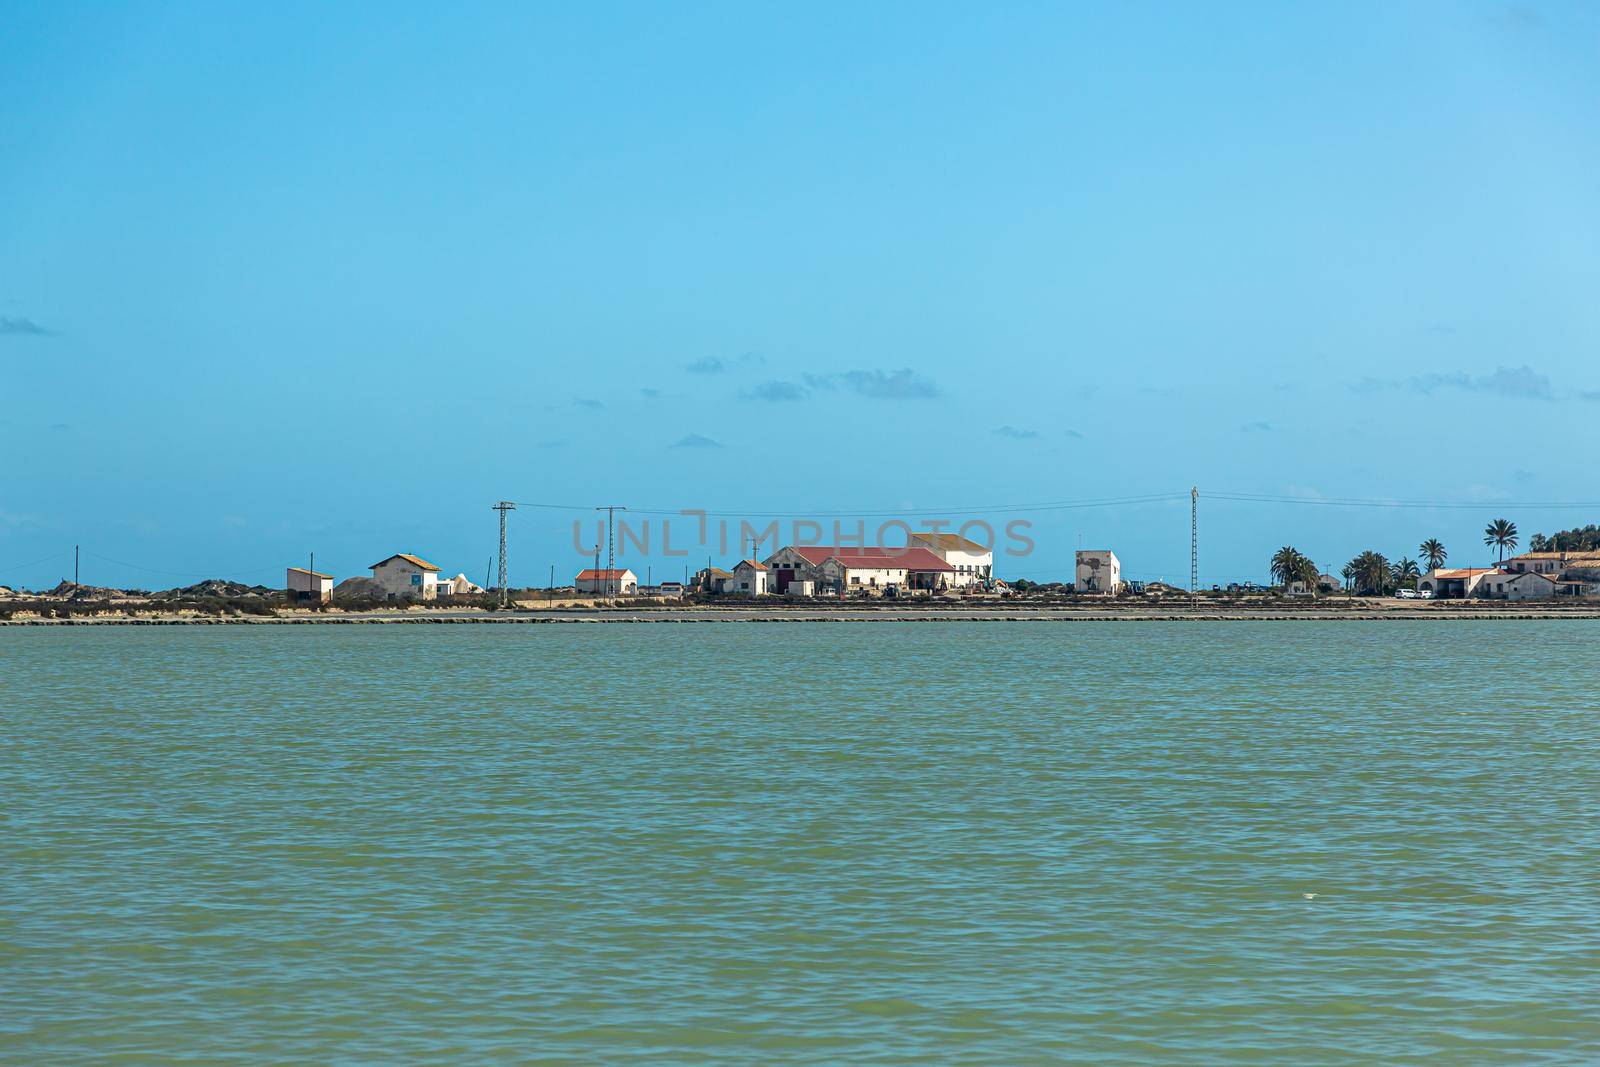 Some buildings on the shore of a salt lake. Blue sky and green water.